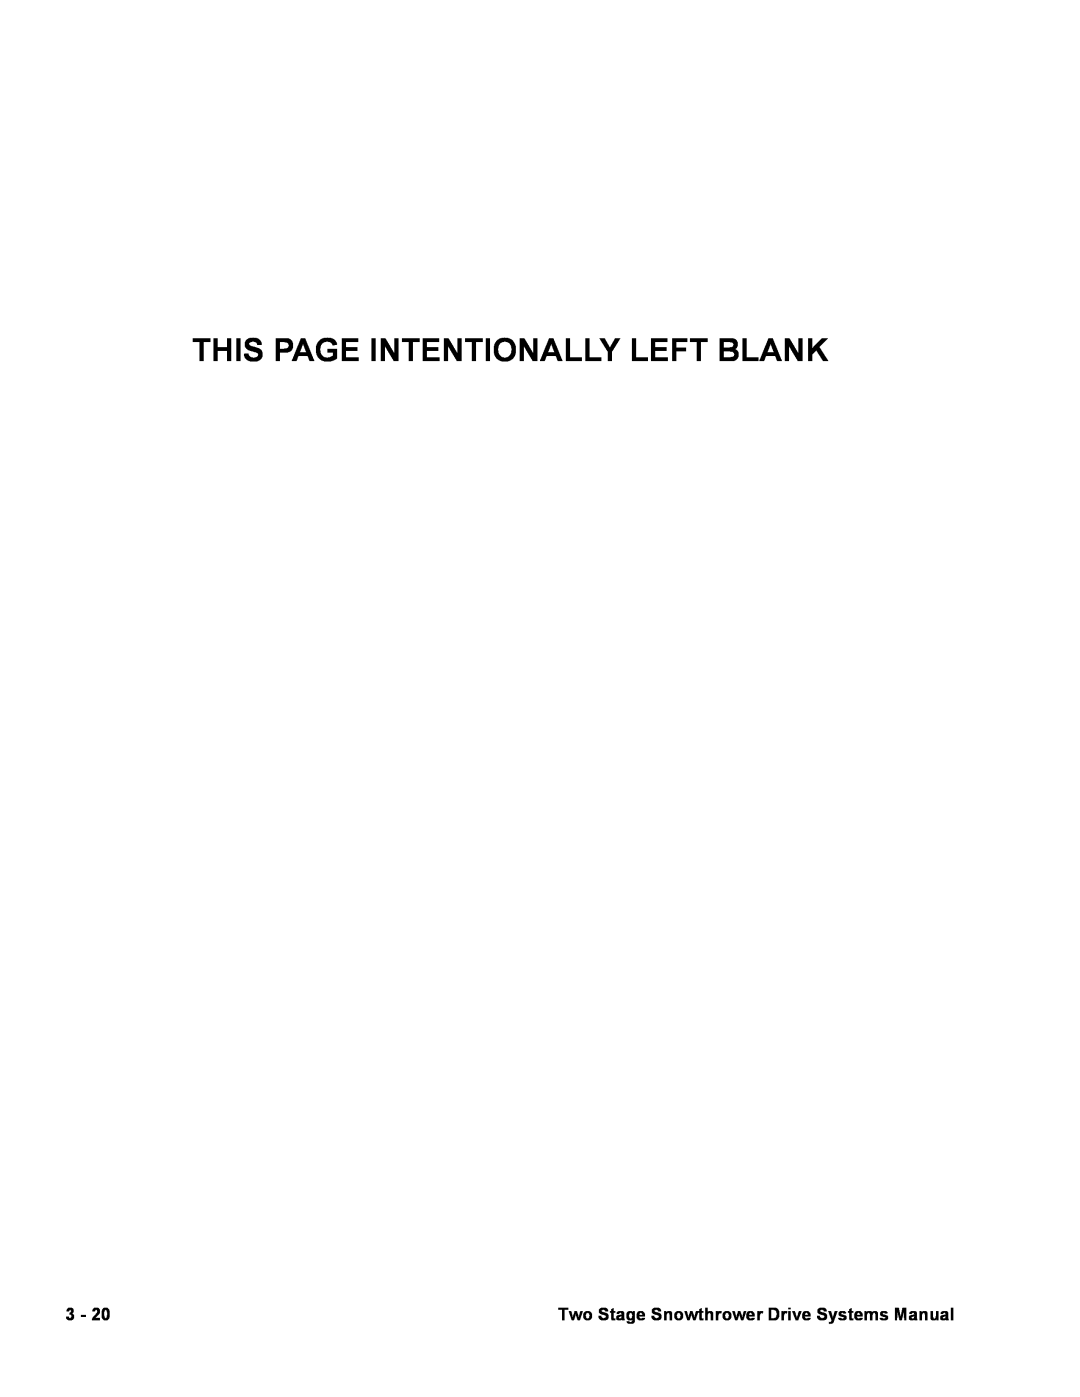 Toro 38080, 38065 manual This Page Intentionally Left Blank, Two Stage Snowthrower Drive Systems Manual 